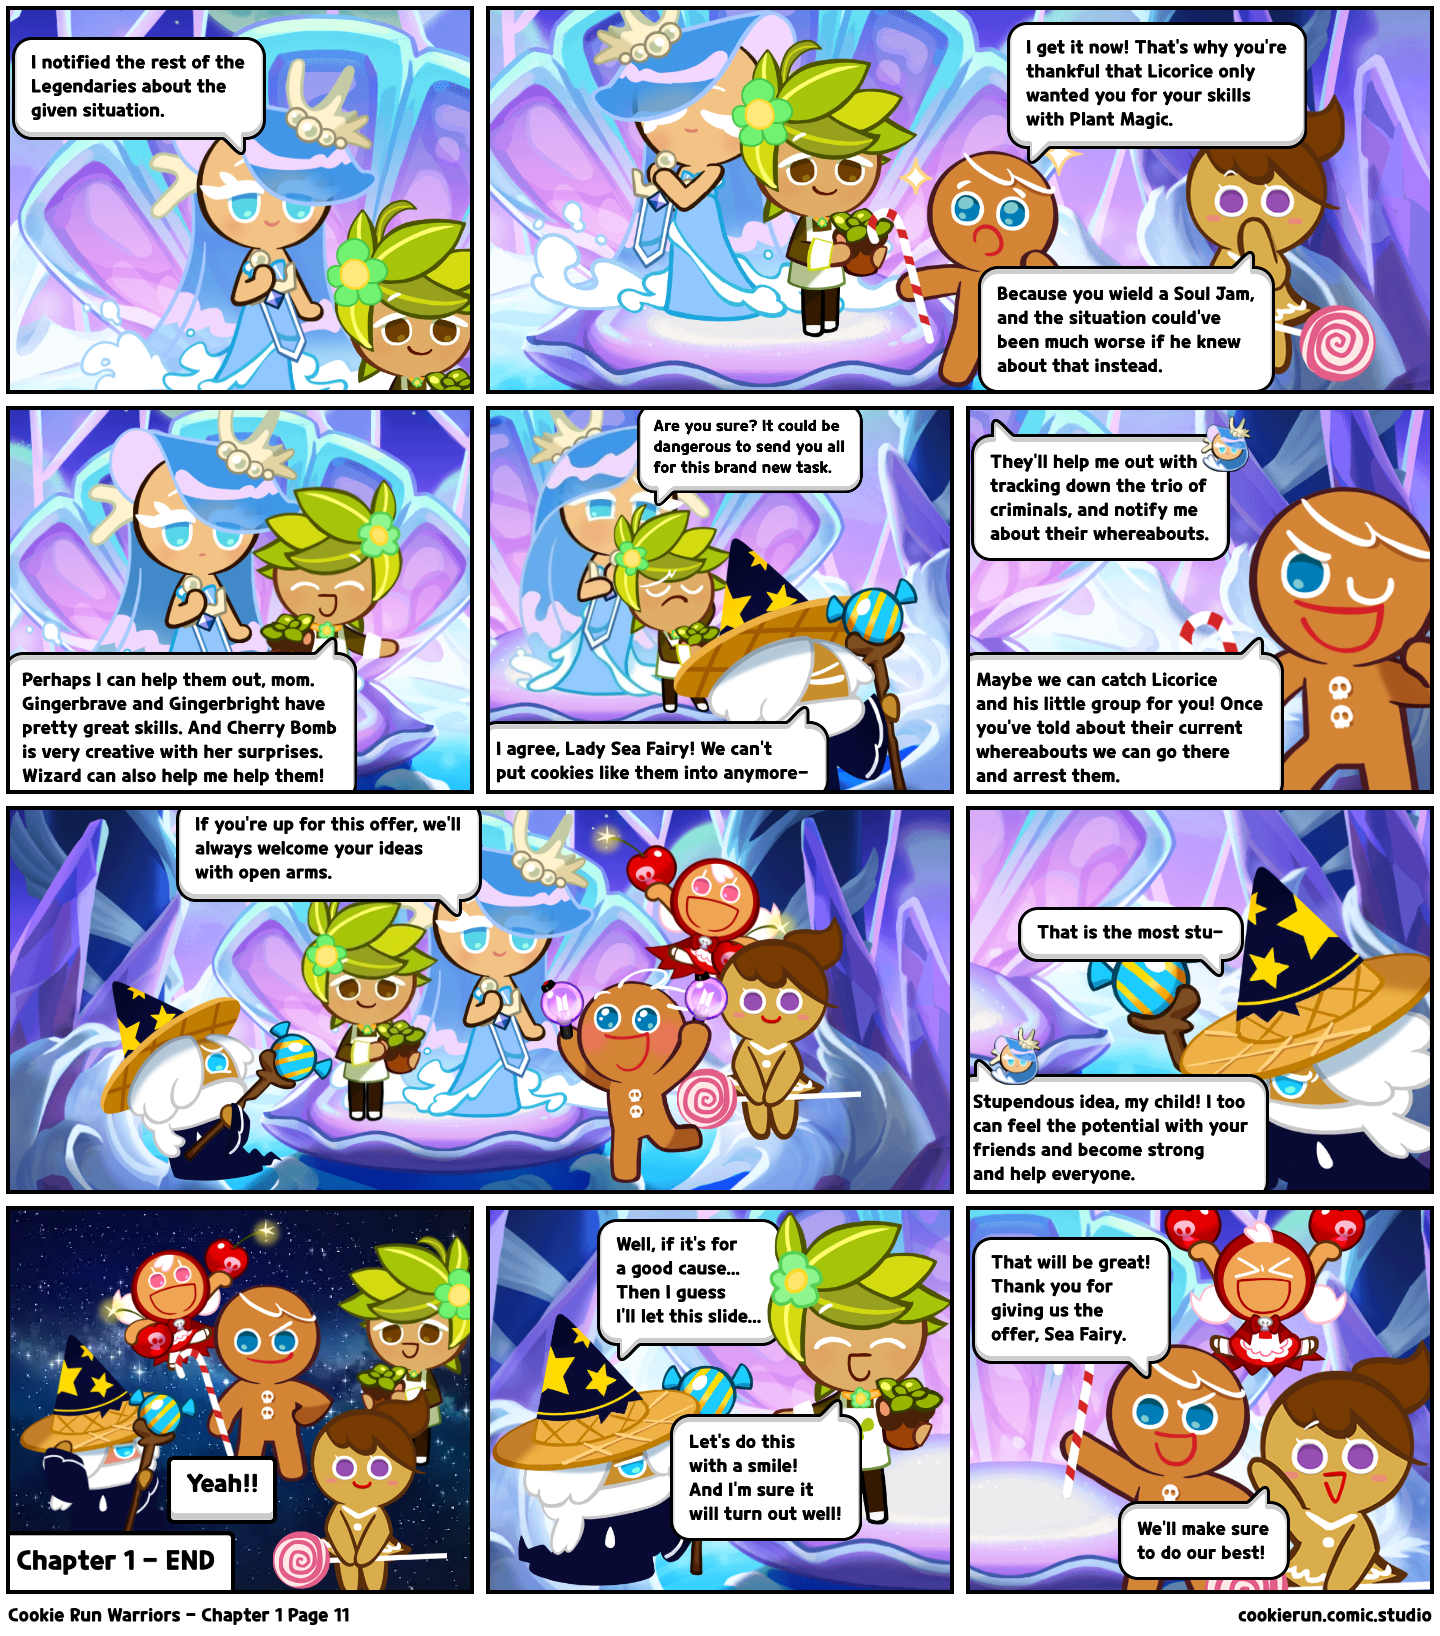 Cookie Run Warriors - Chapter 1 Page 11